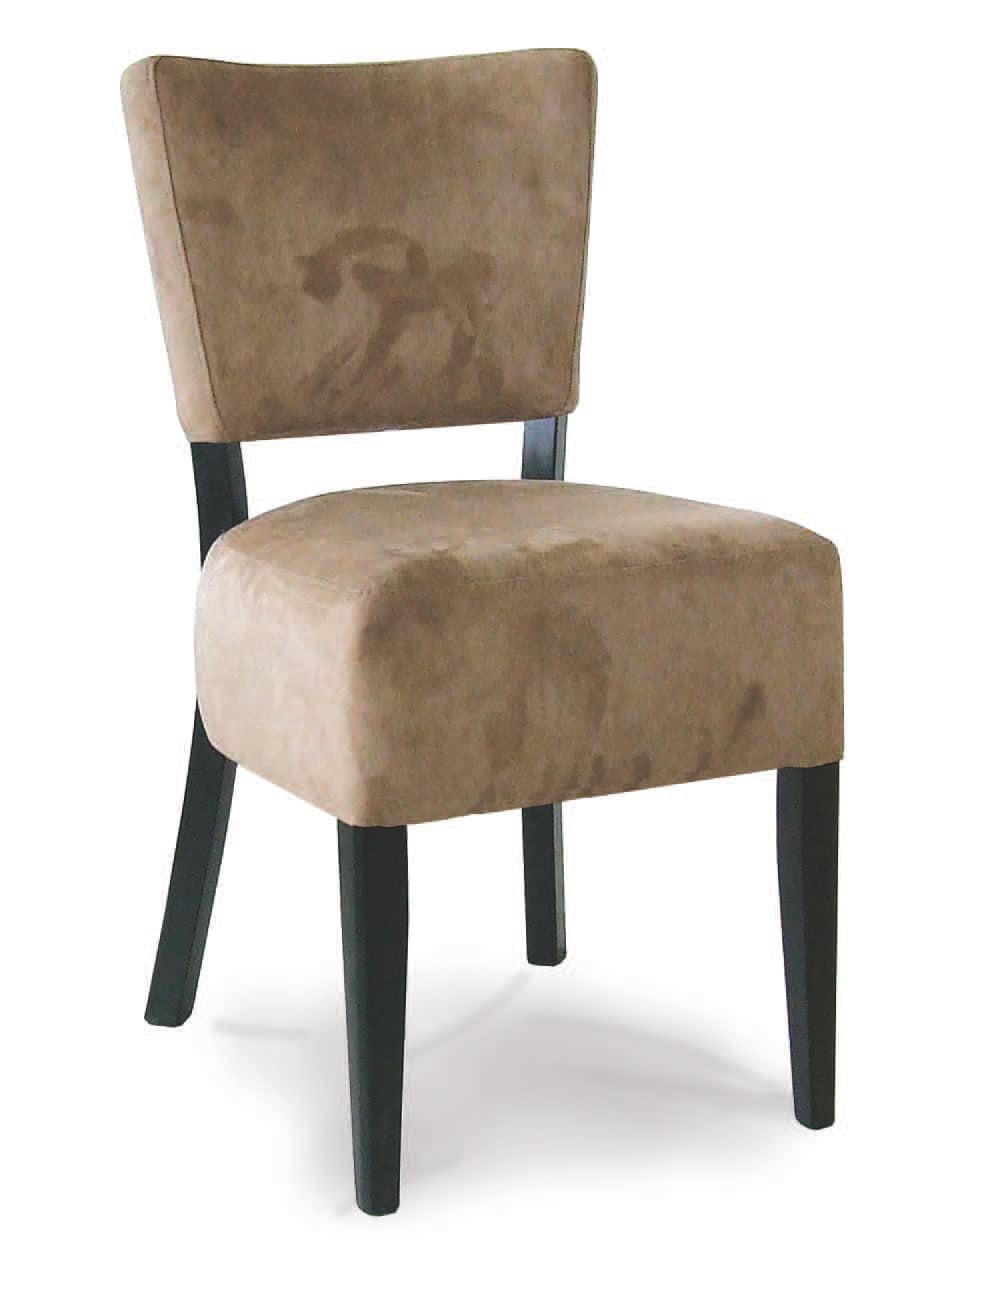 Portocervo P, Padded chair in painted wood, in various colors